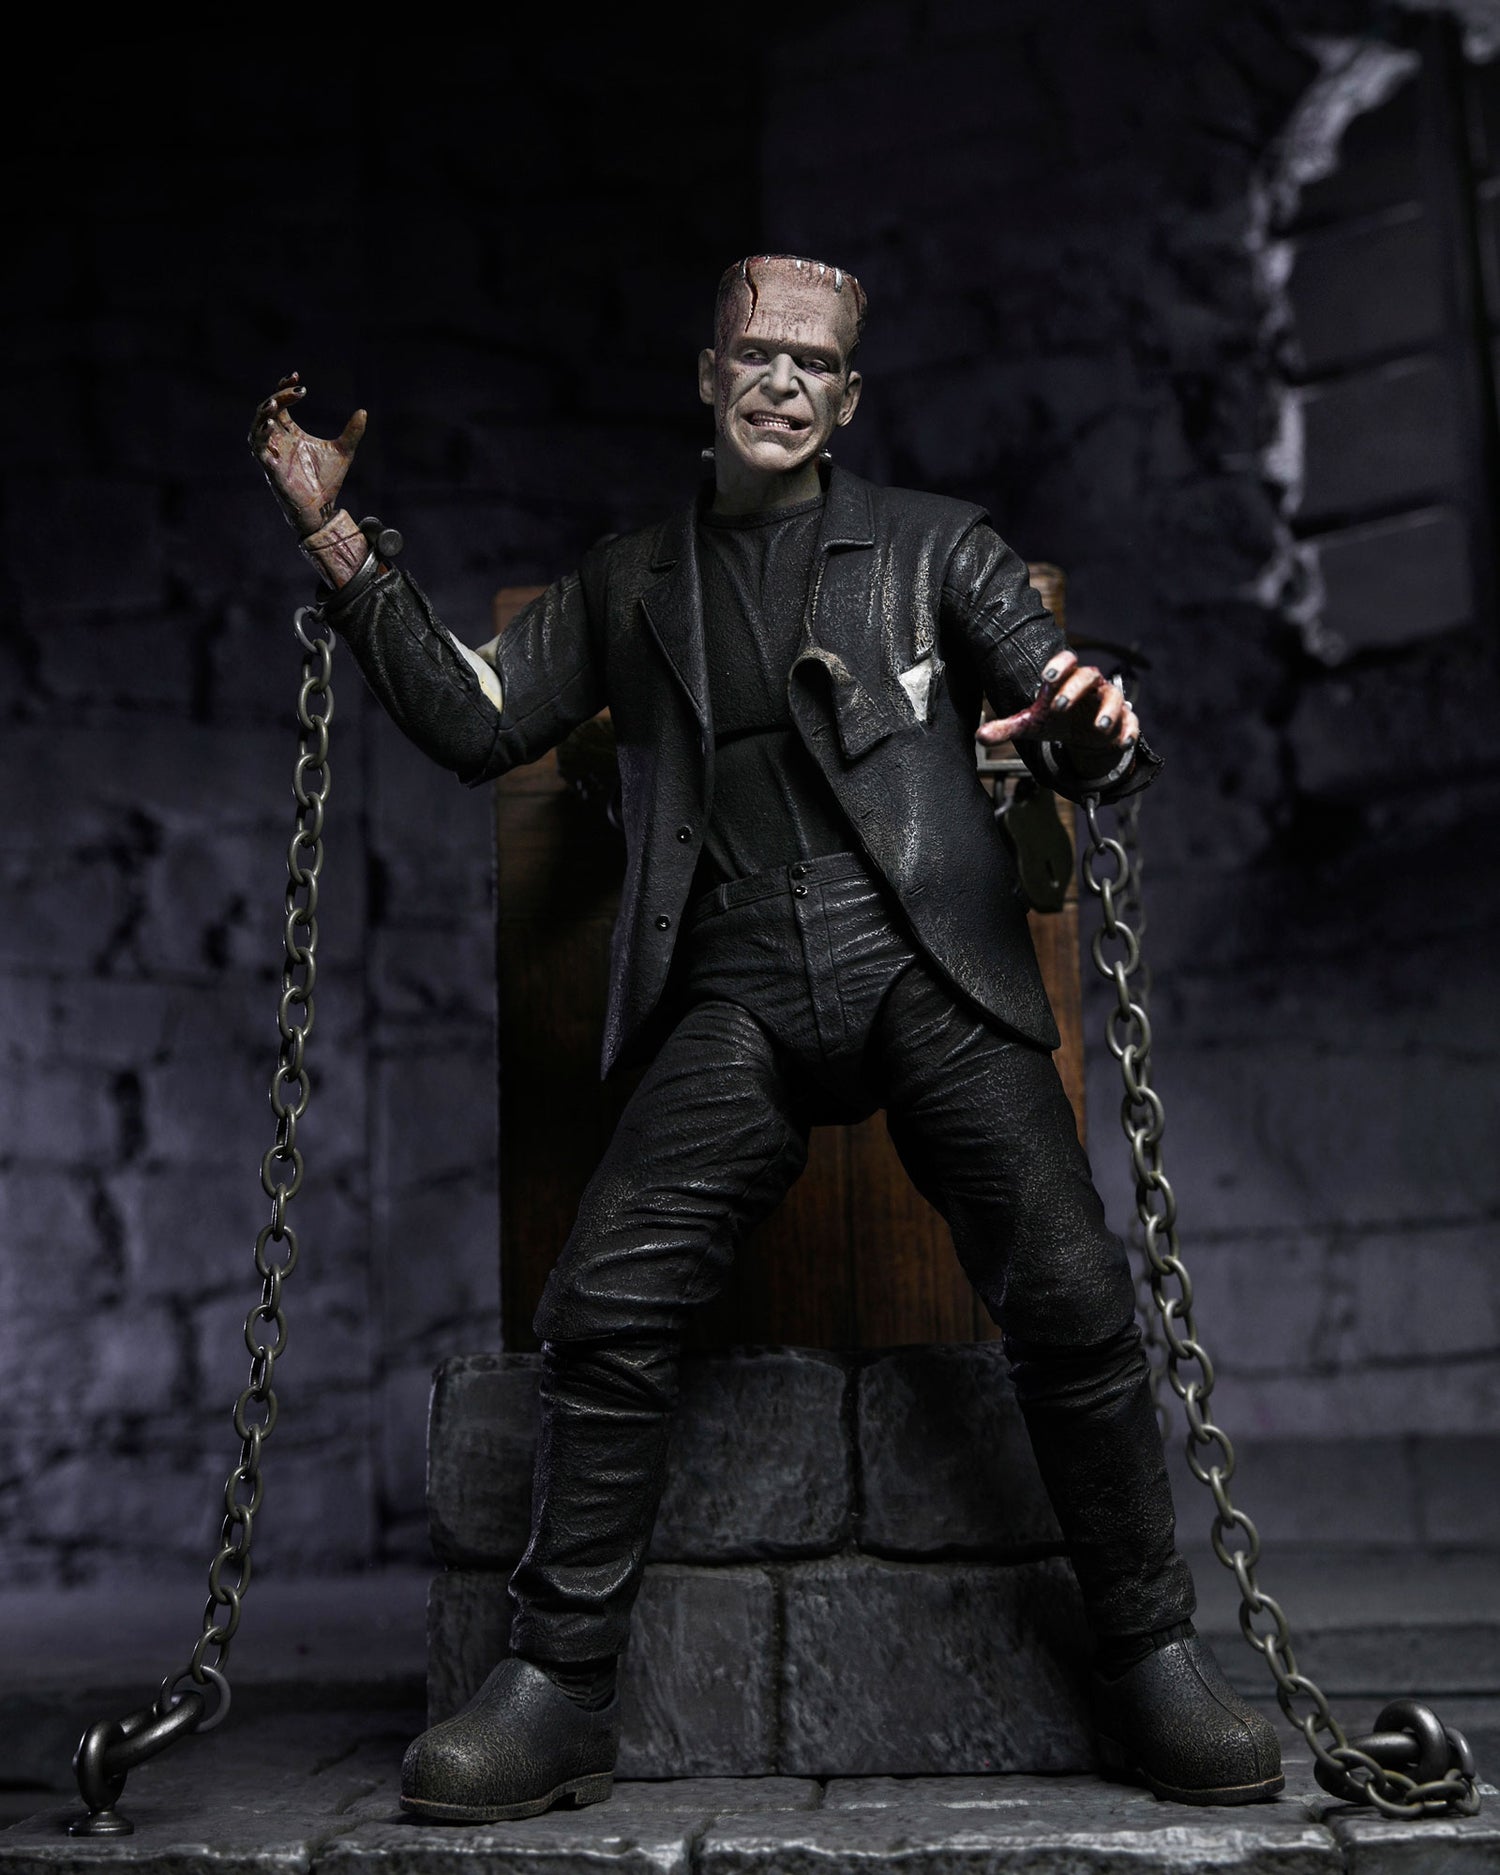 NECA Action Figures, Statues, Collectibles, and More!